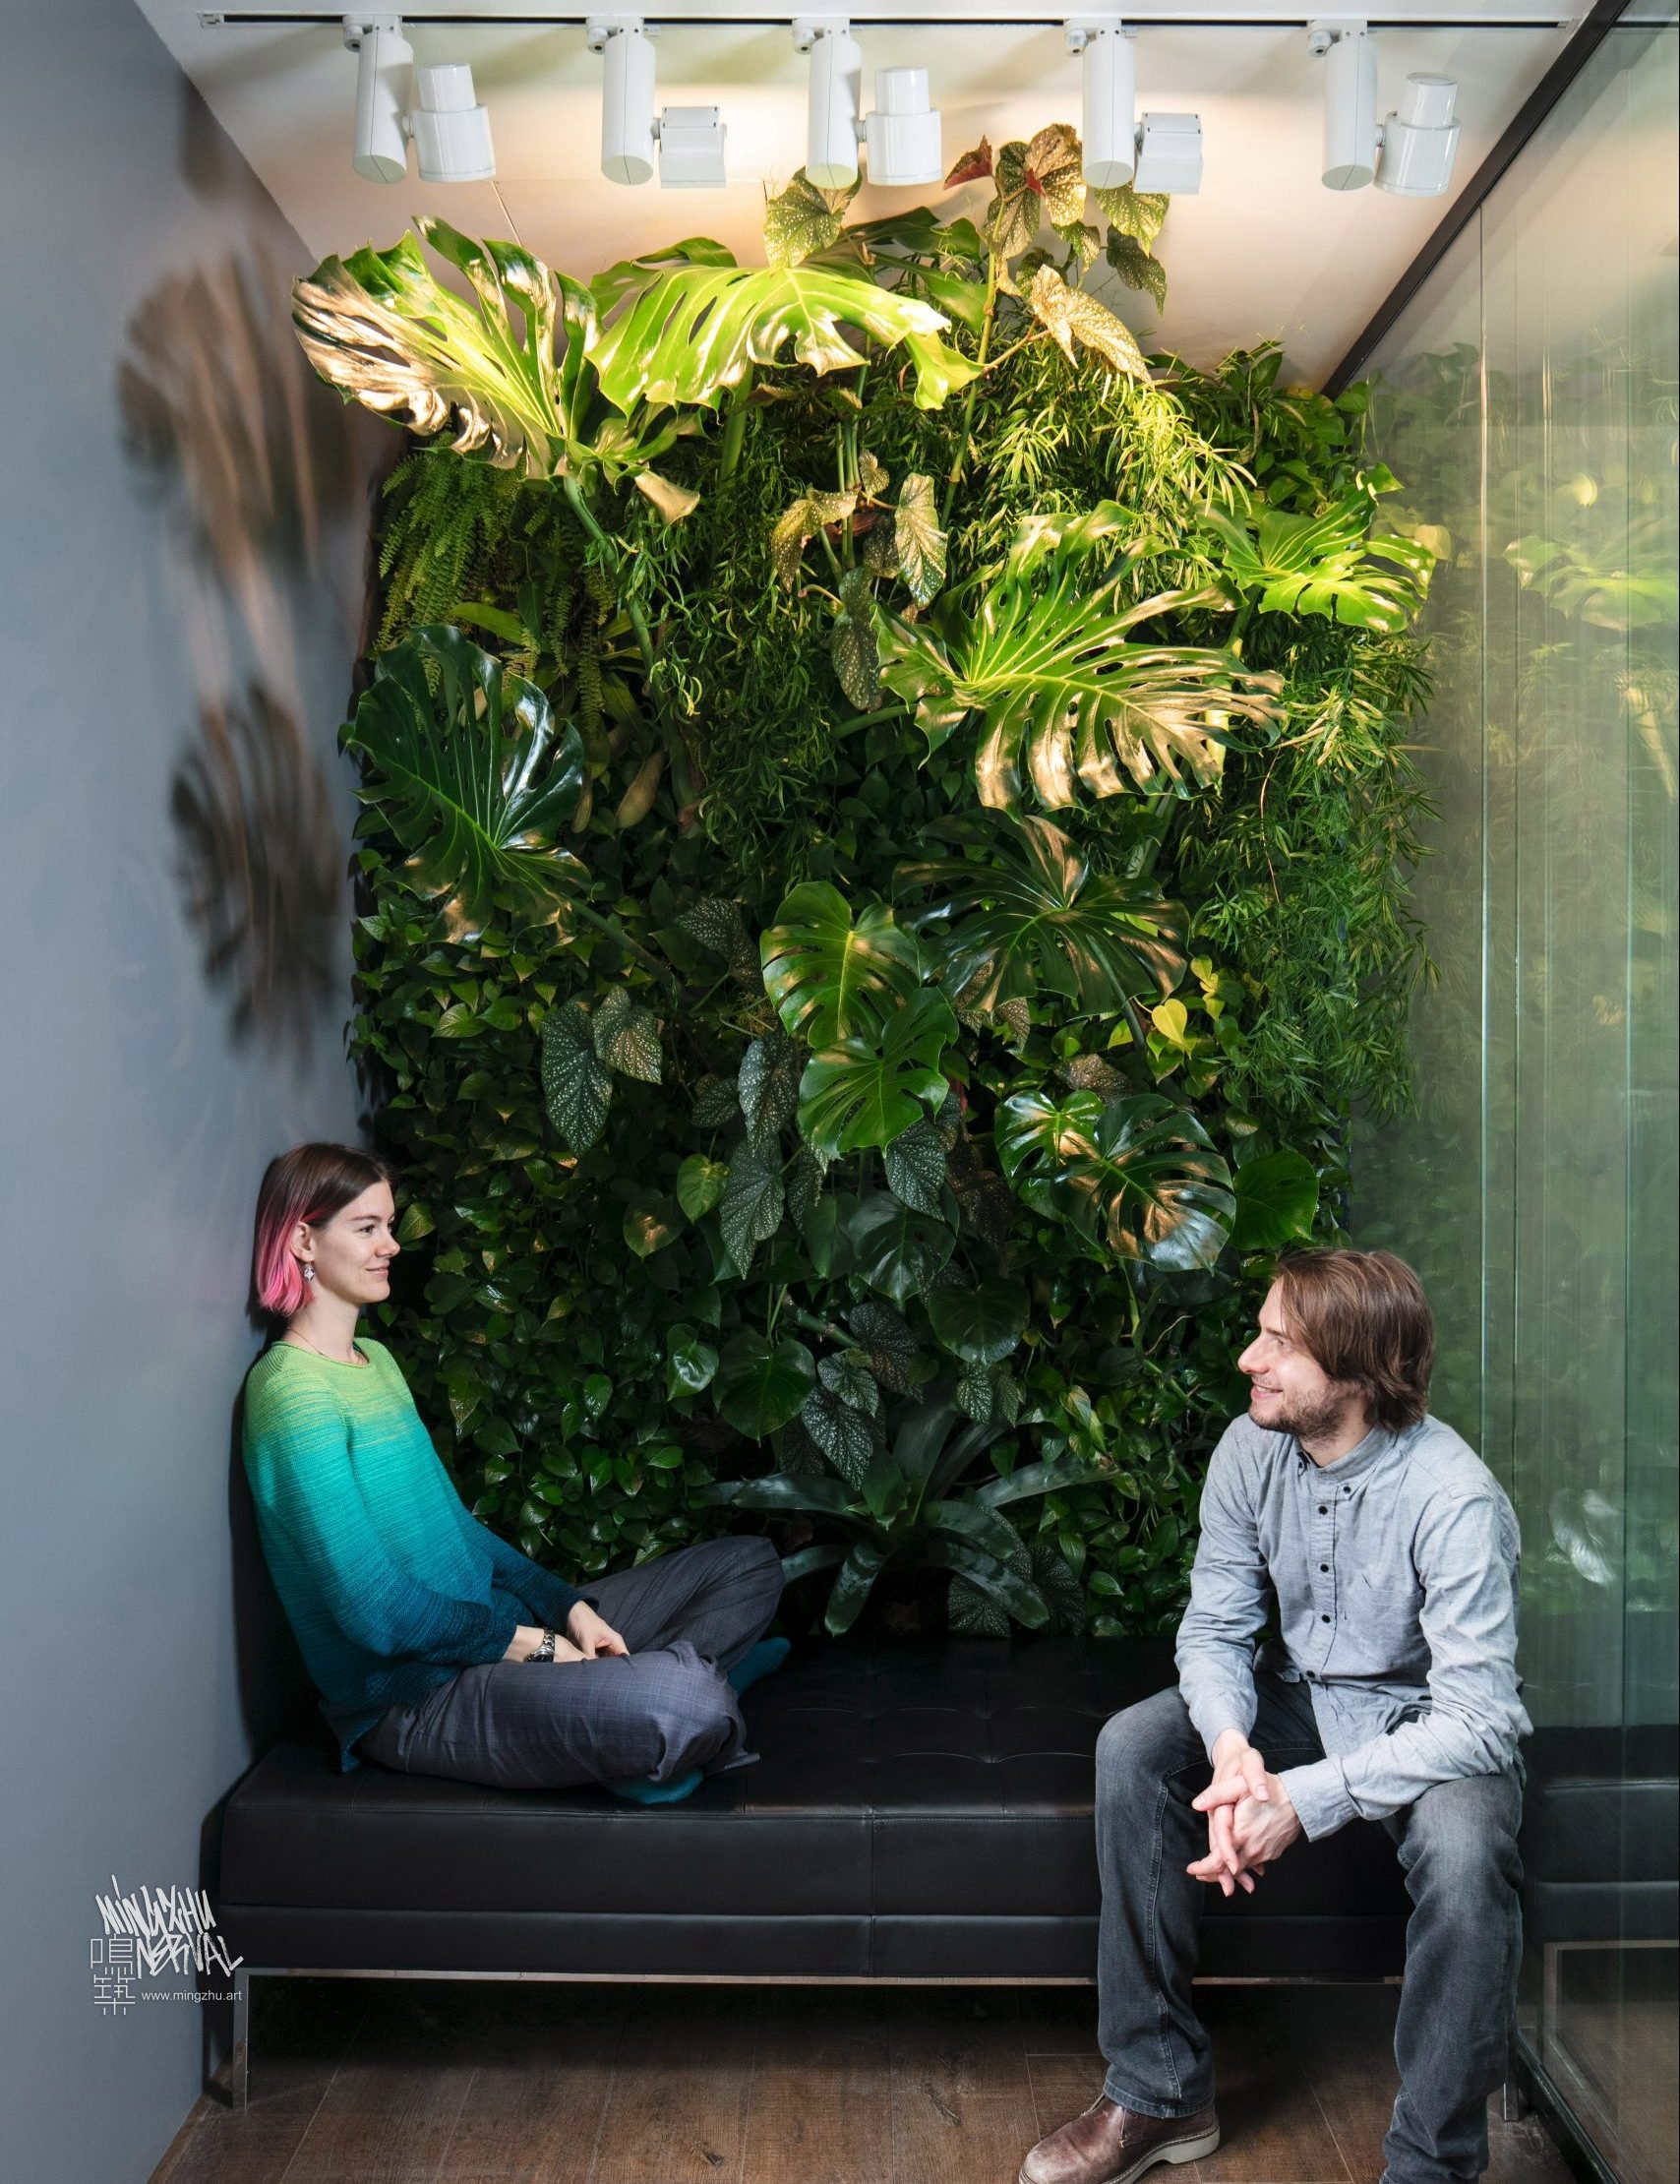 At Mingzhu Nerval, we thrive at creating the most beautiful vertical gardens in the world. For Studio Illumine, we created a homely living wall design - Shanghai, 2015.